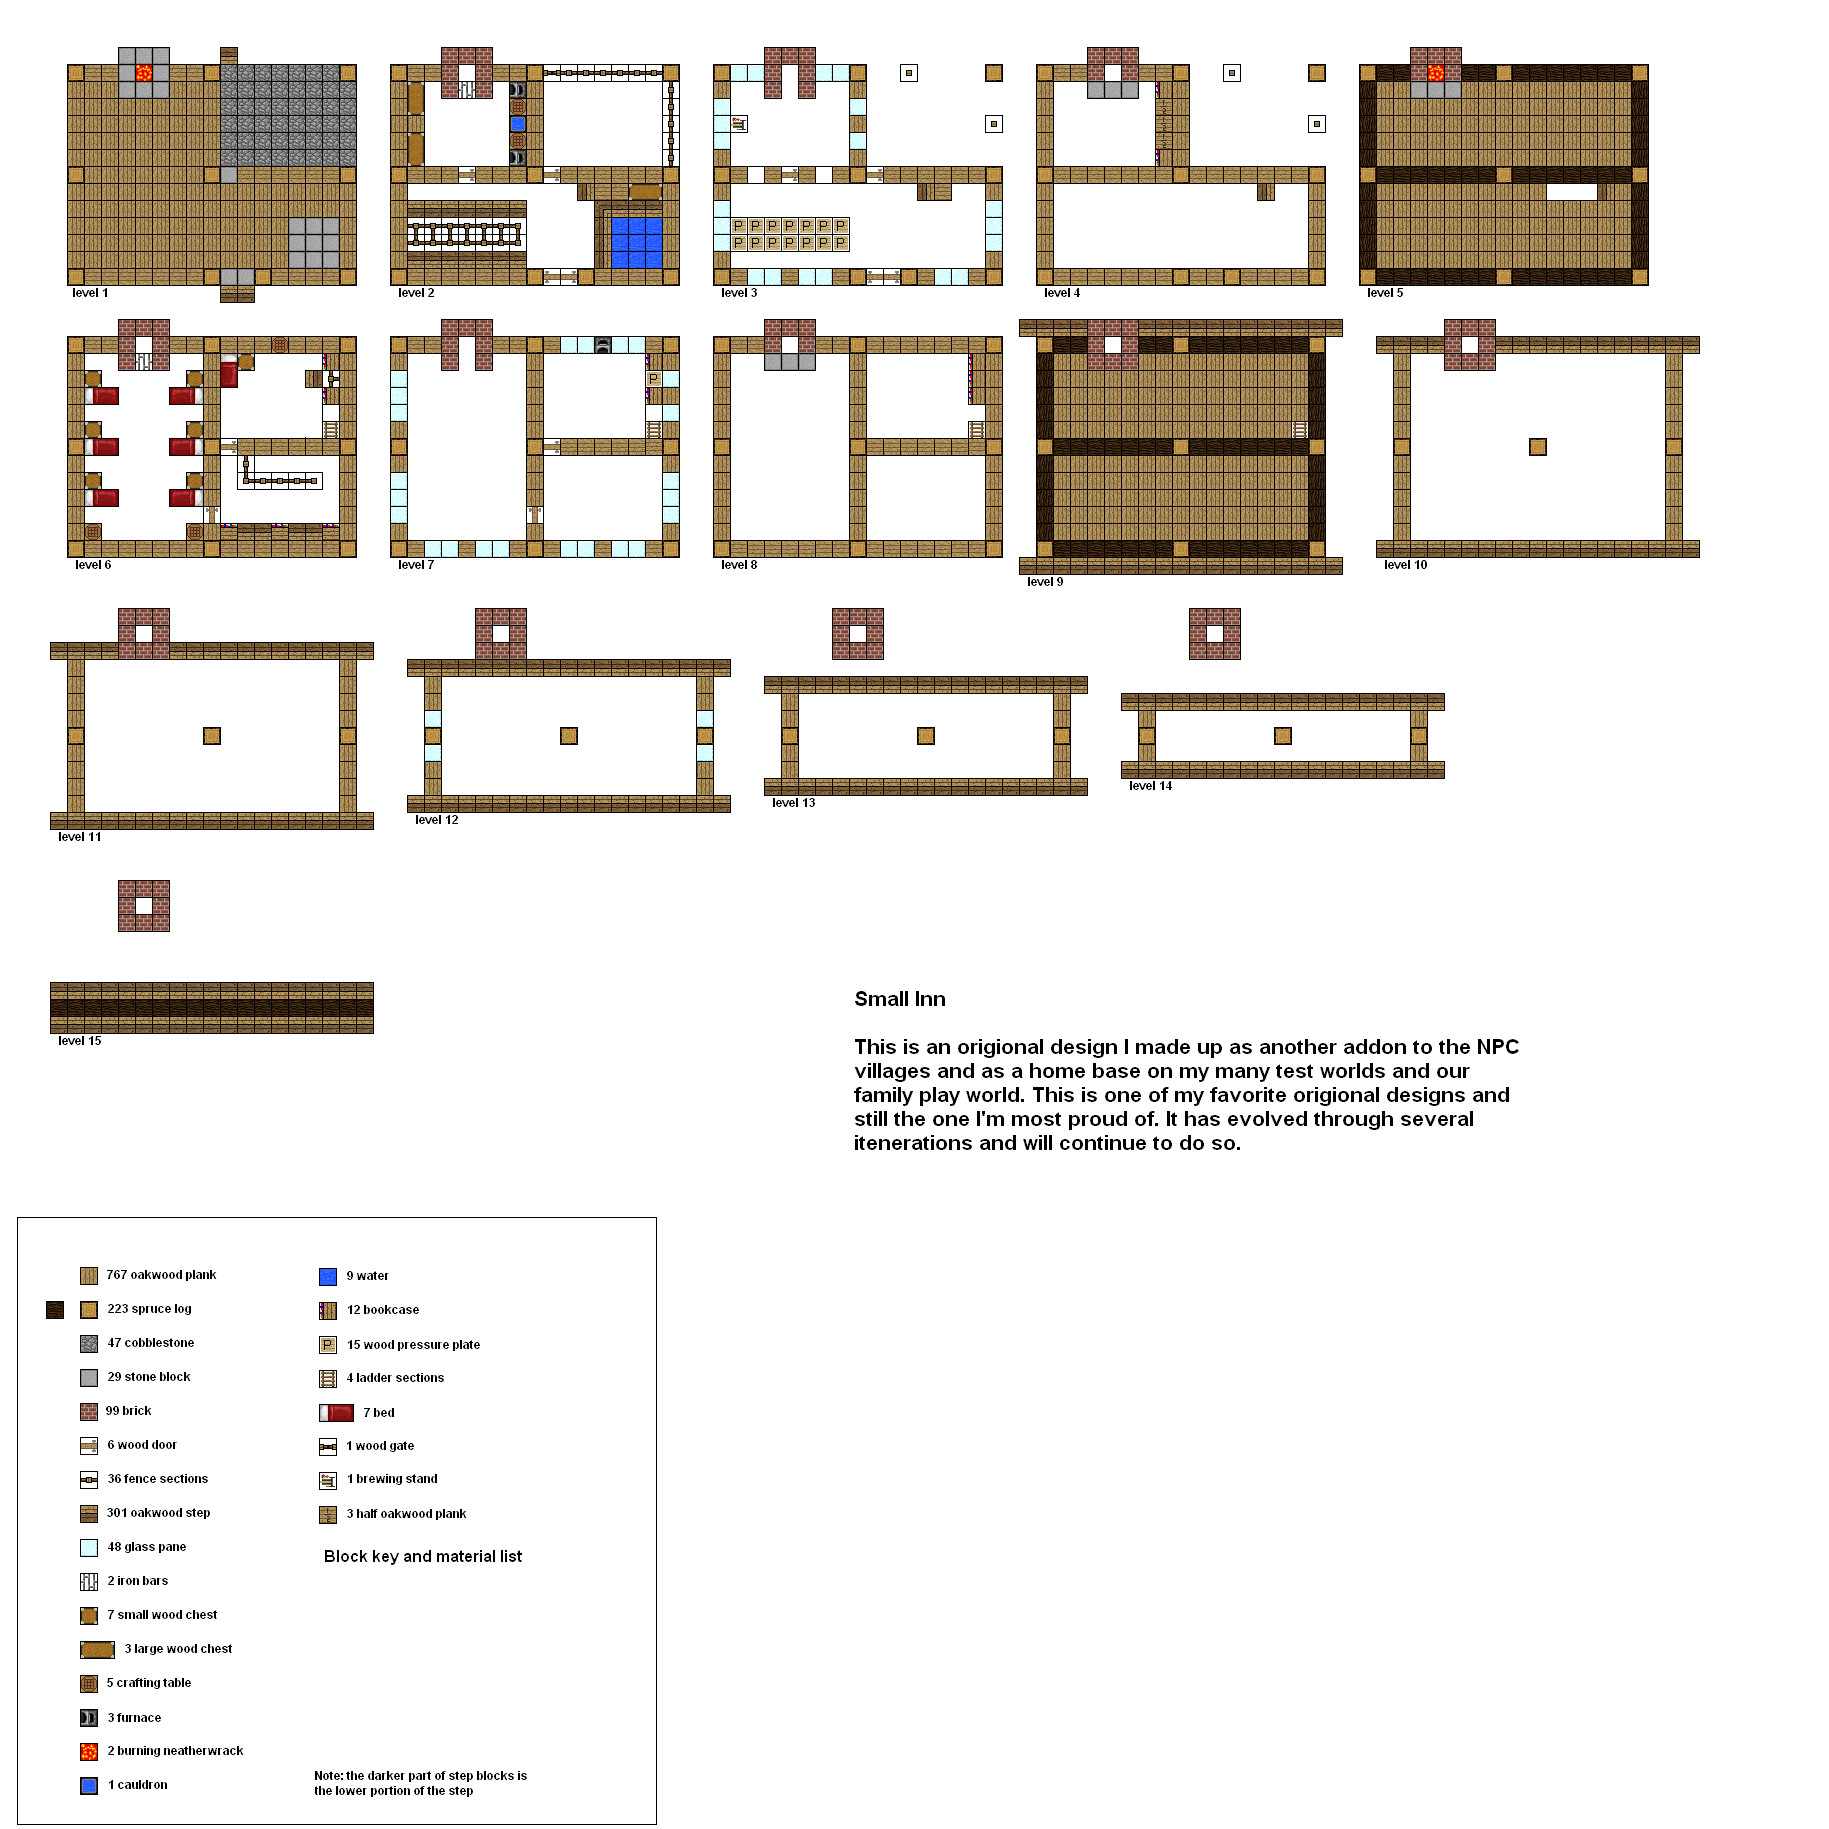 Minecraft floorplans small Inn by ColtCoyote